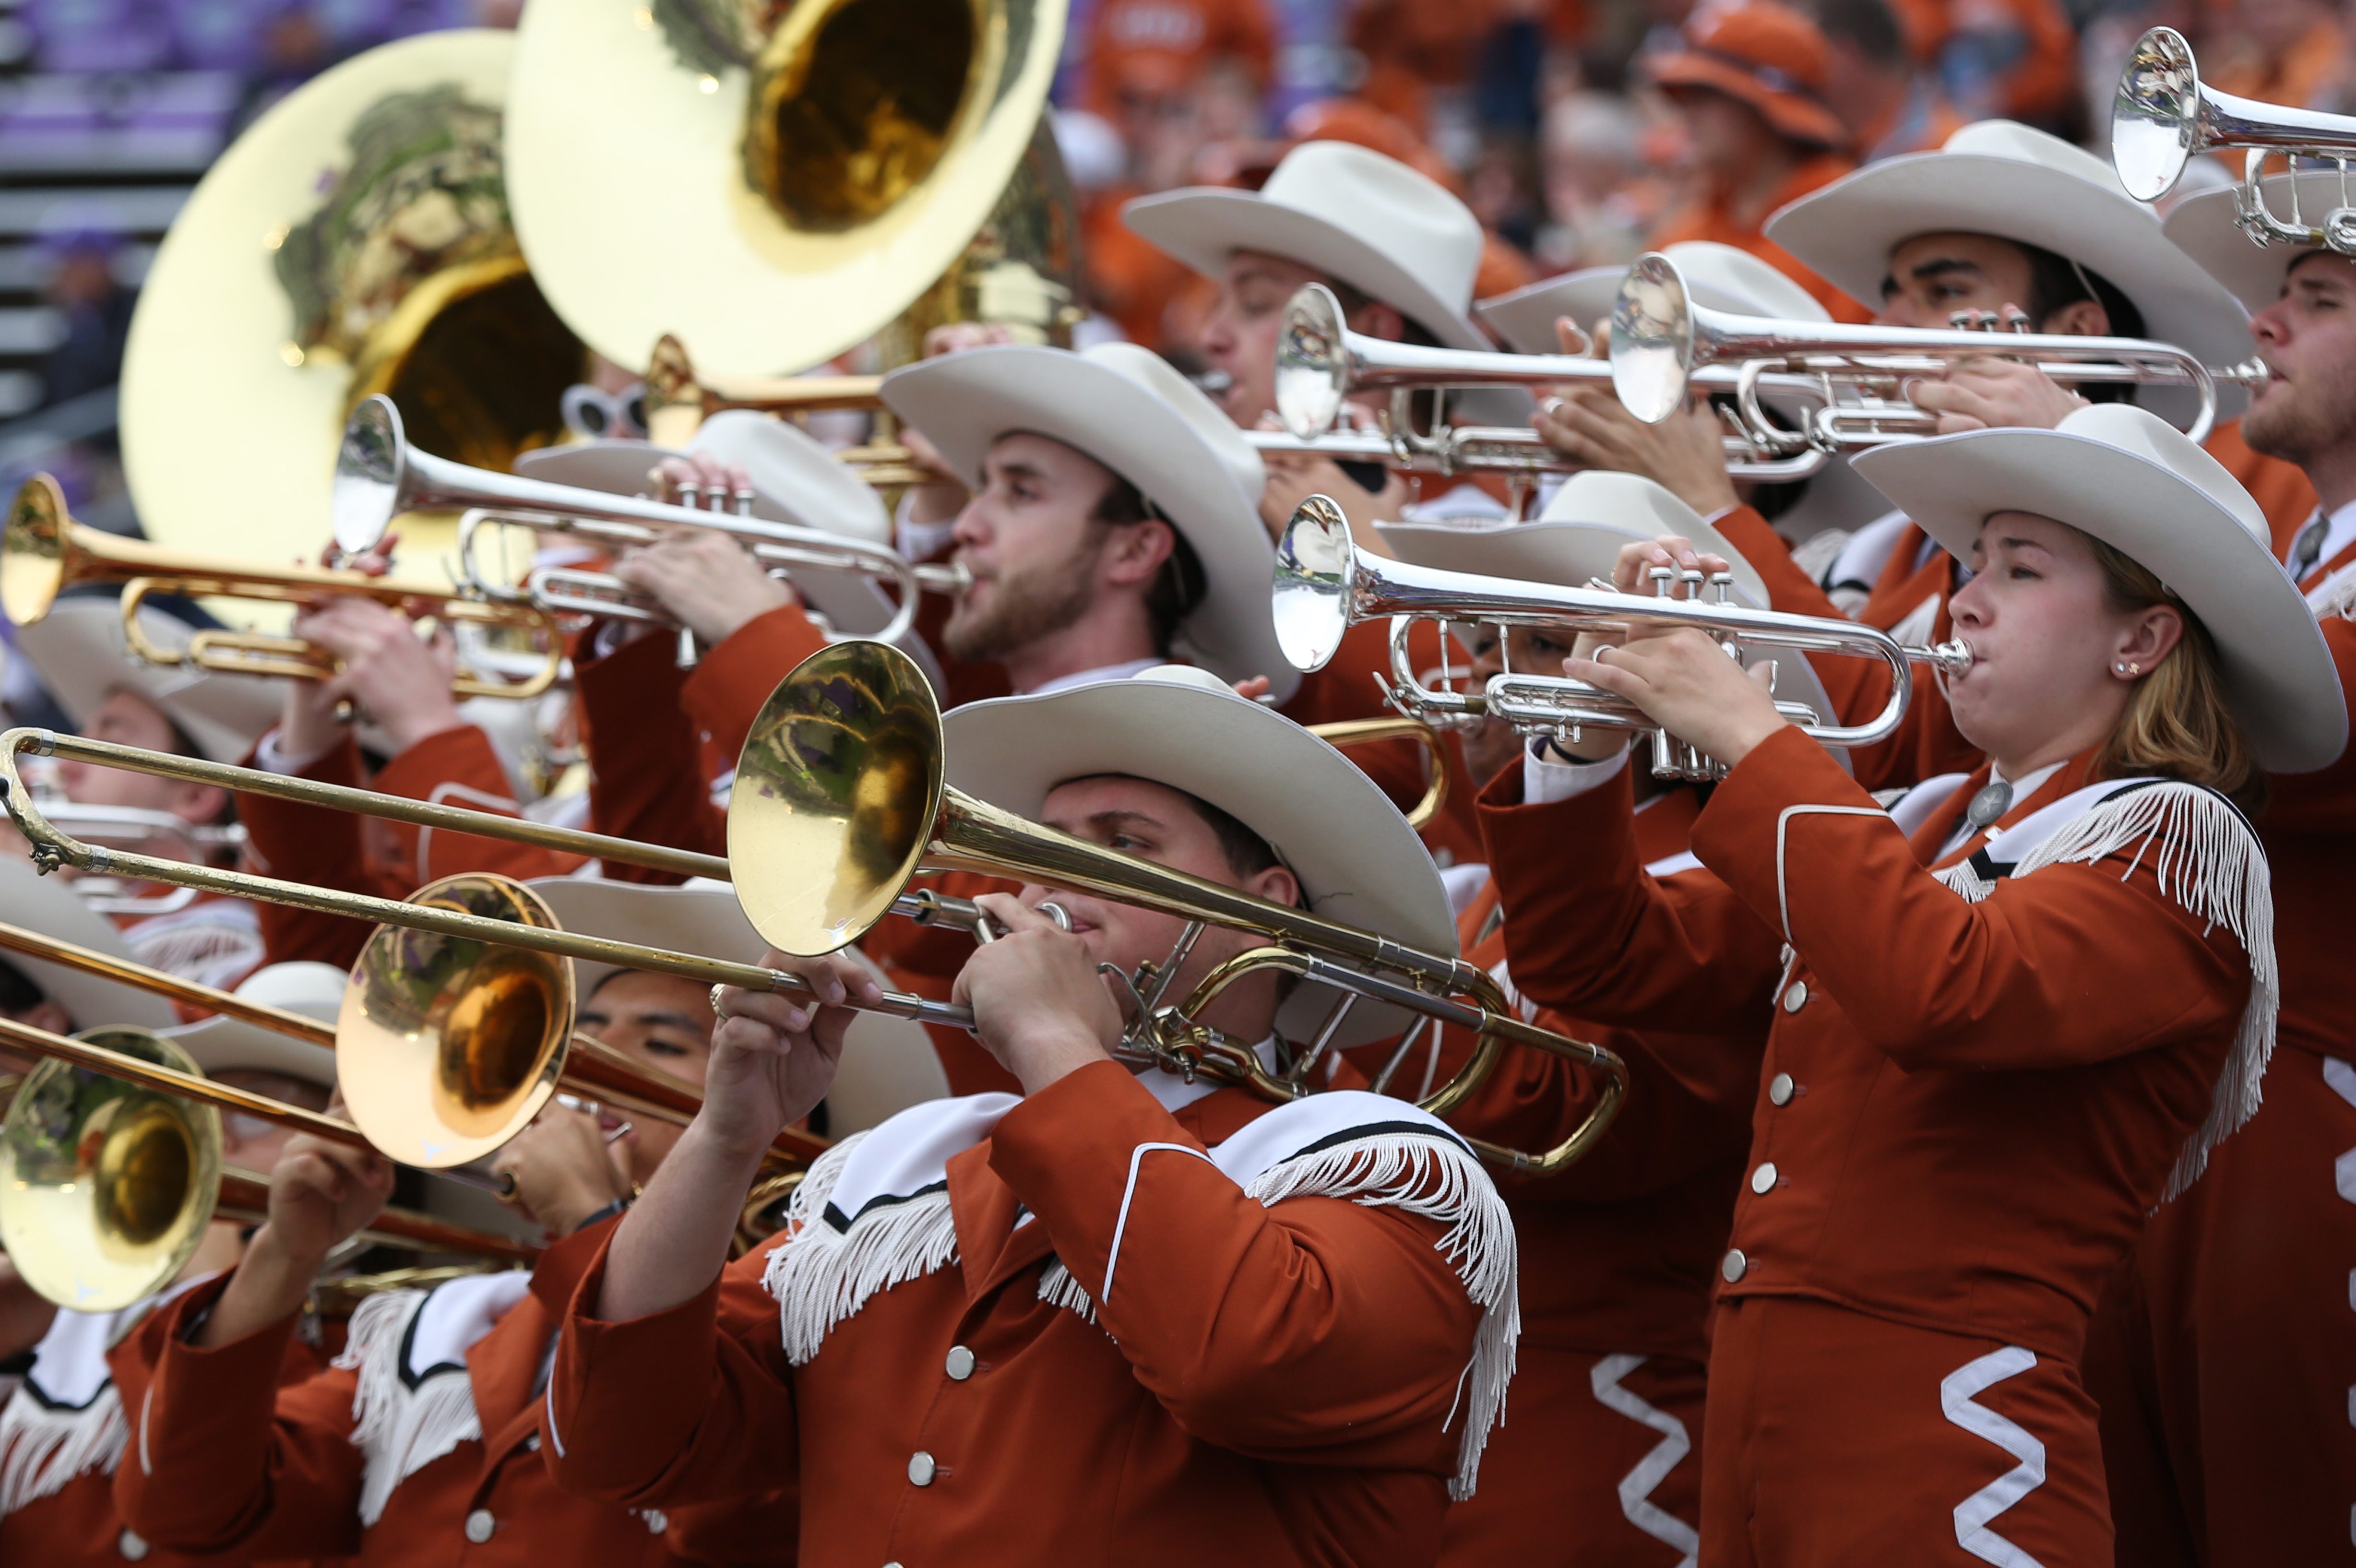 University of Texas Confirms "The Eyes of Texas" Will Remain Official School Song